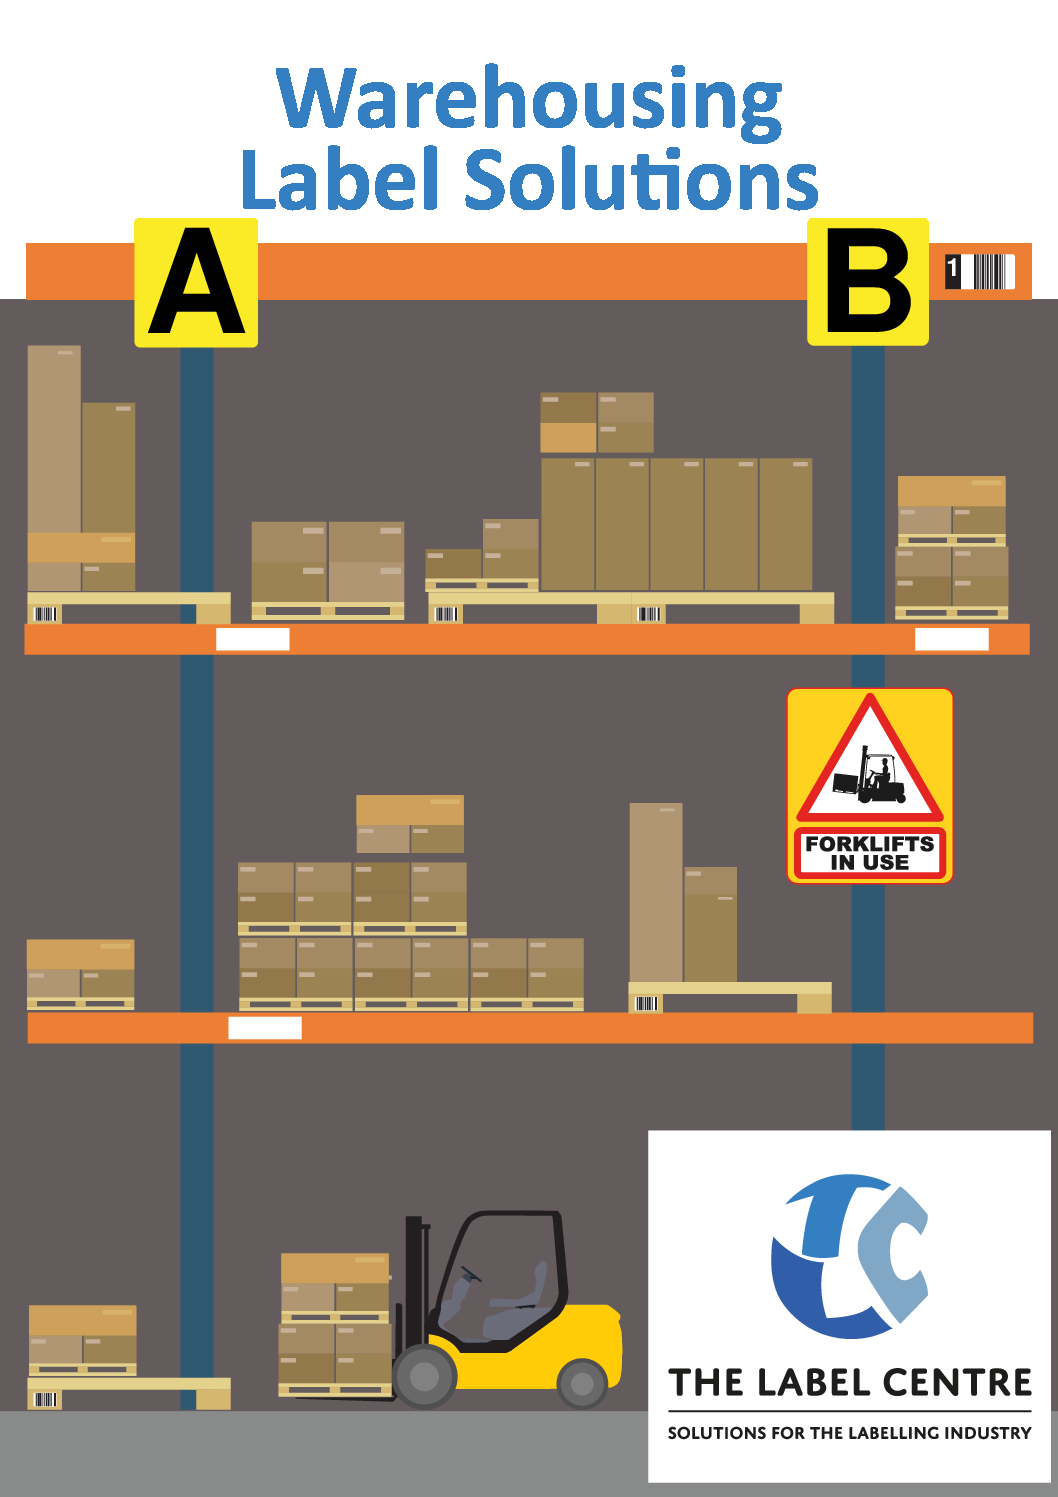 Warehousing Label Solutions